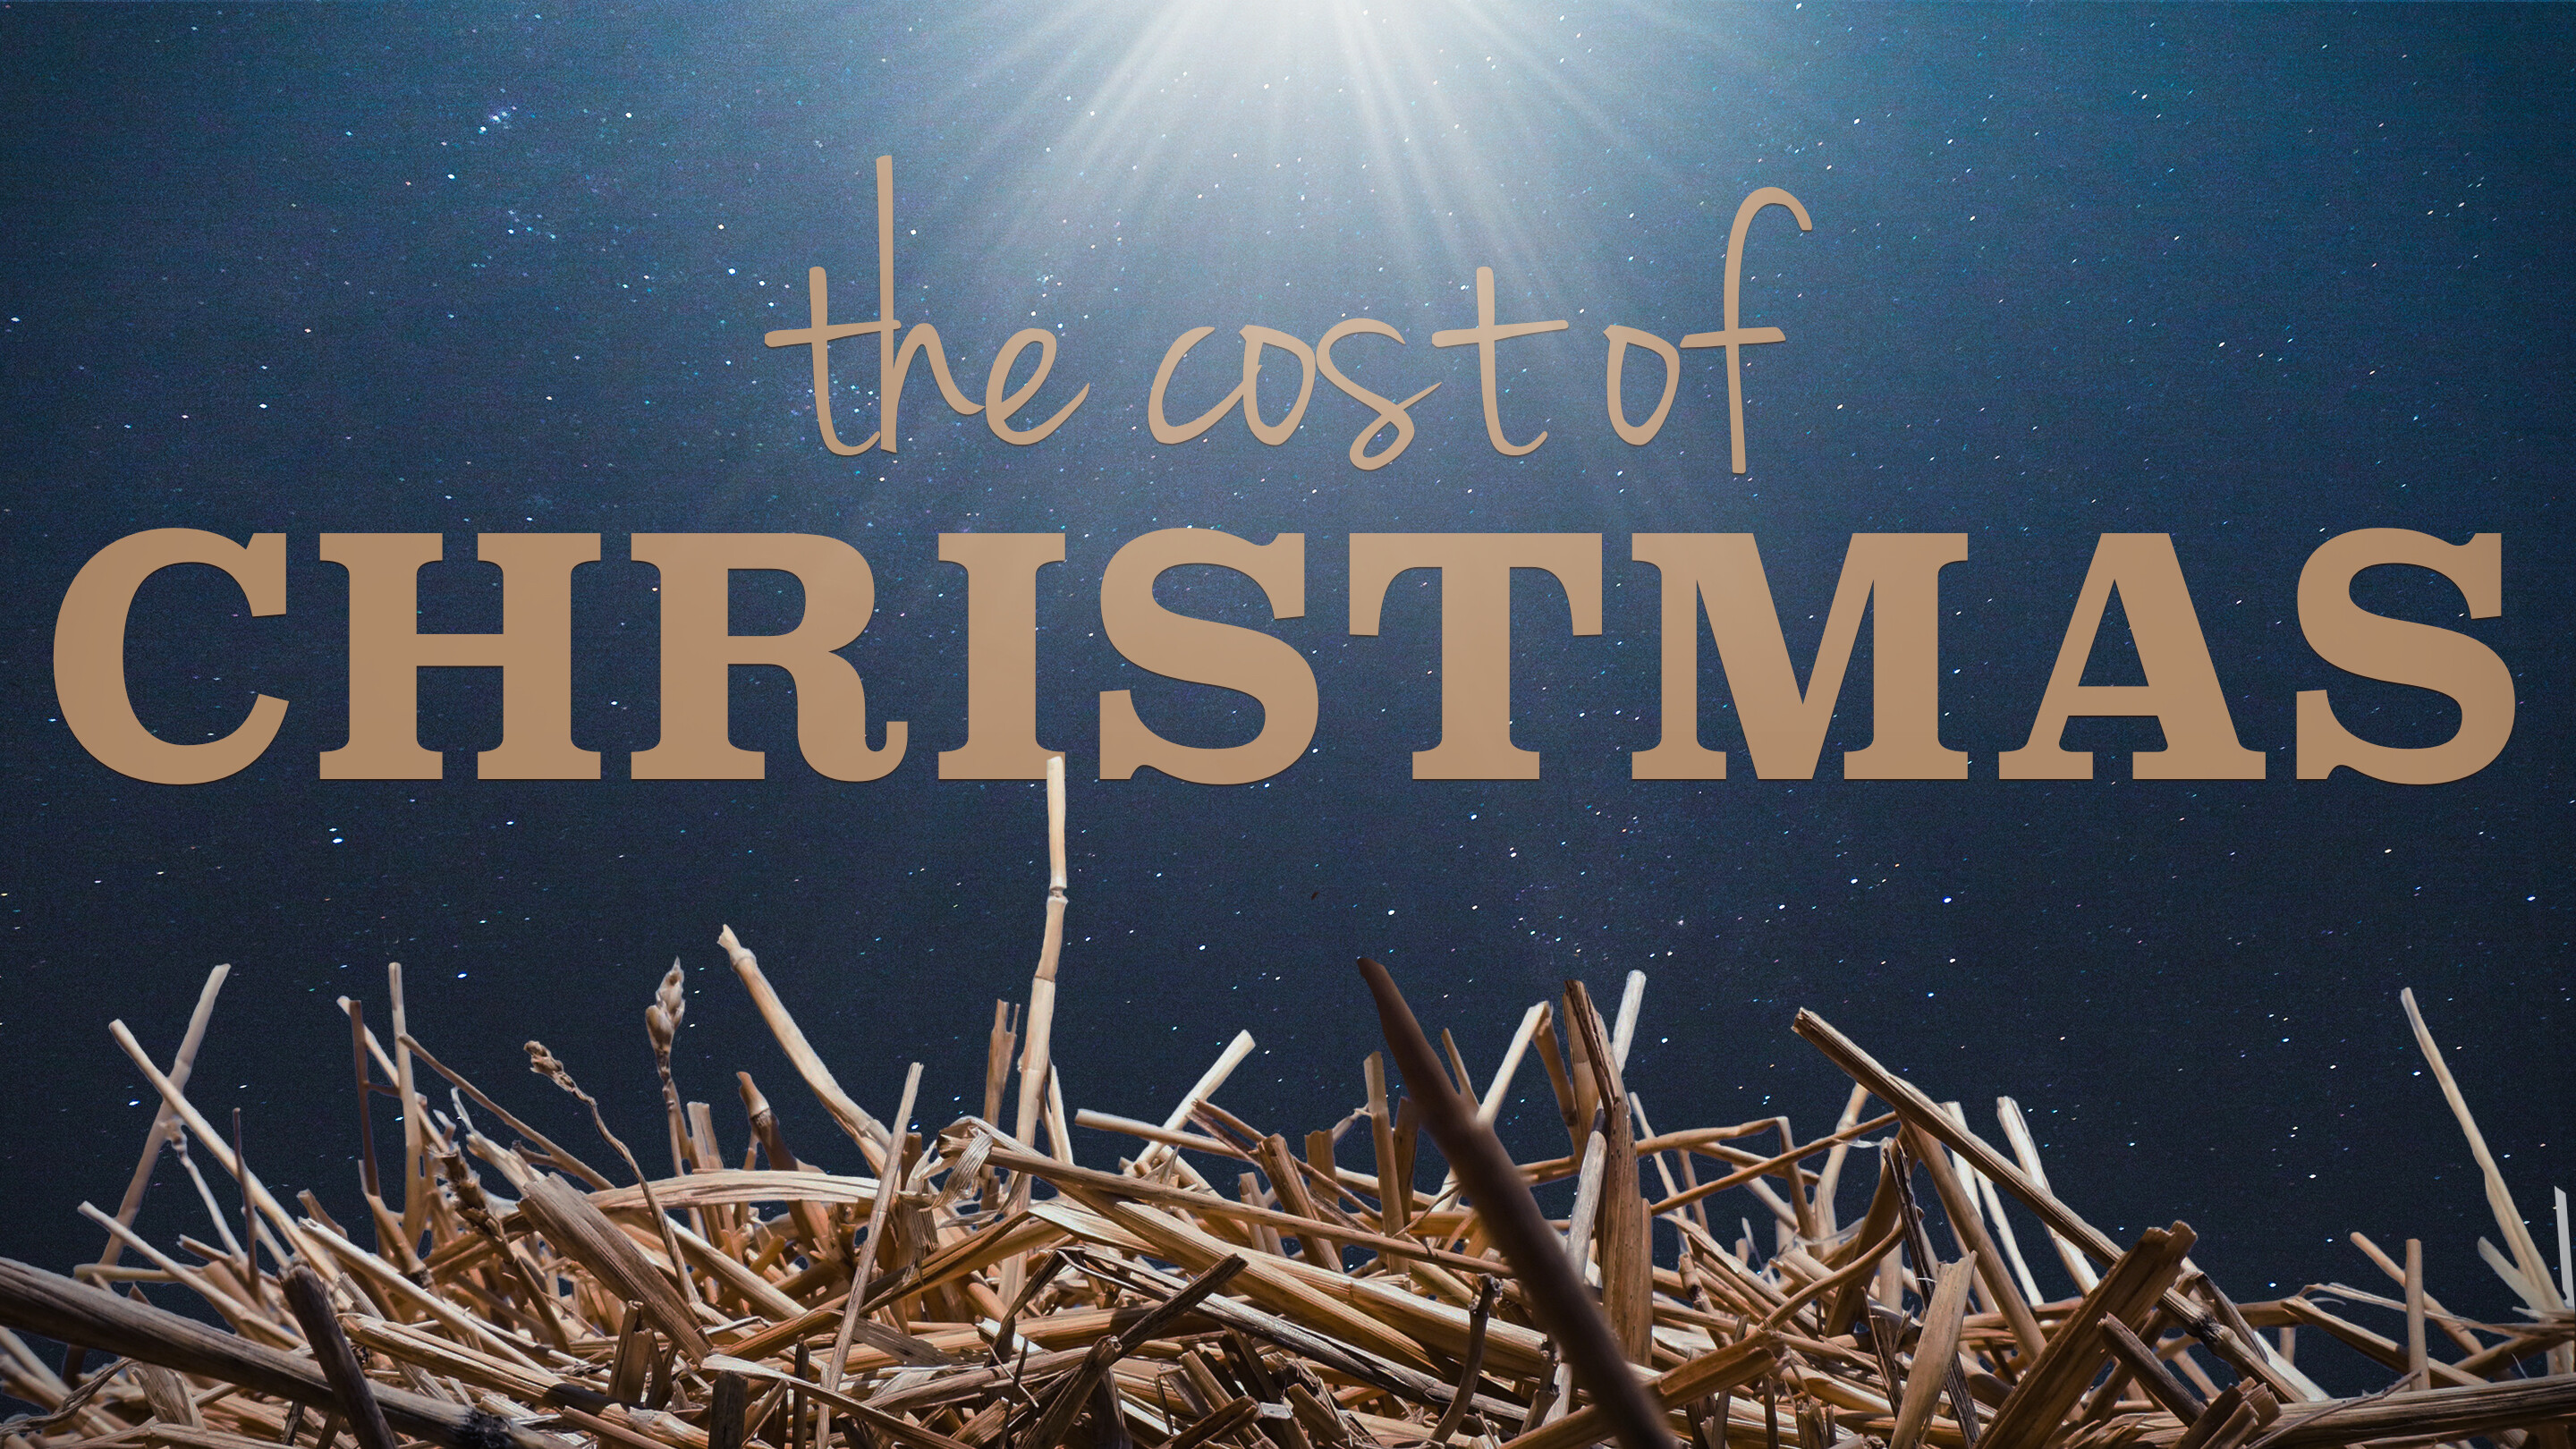 The Cost to the Shepherds